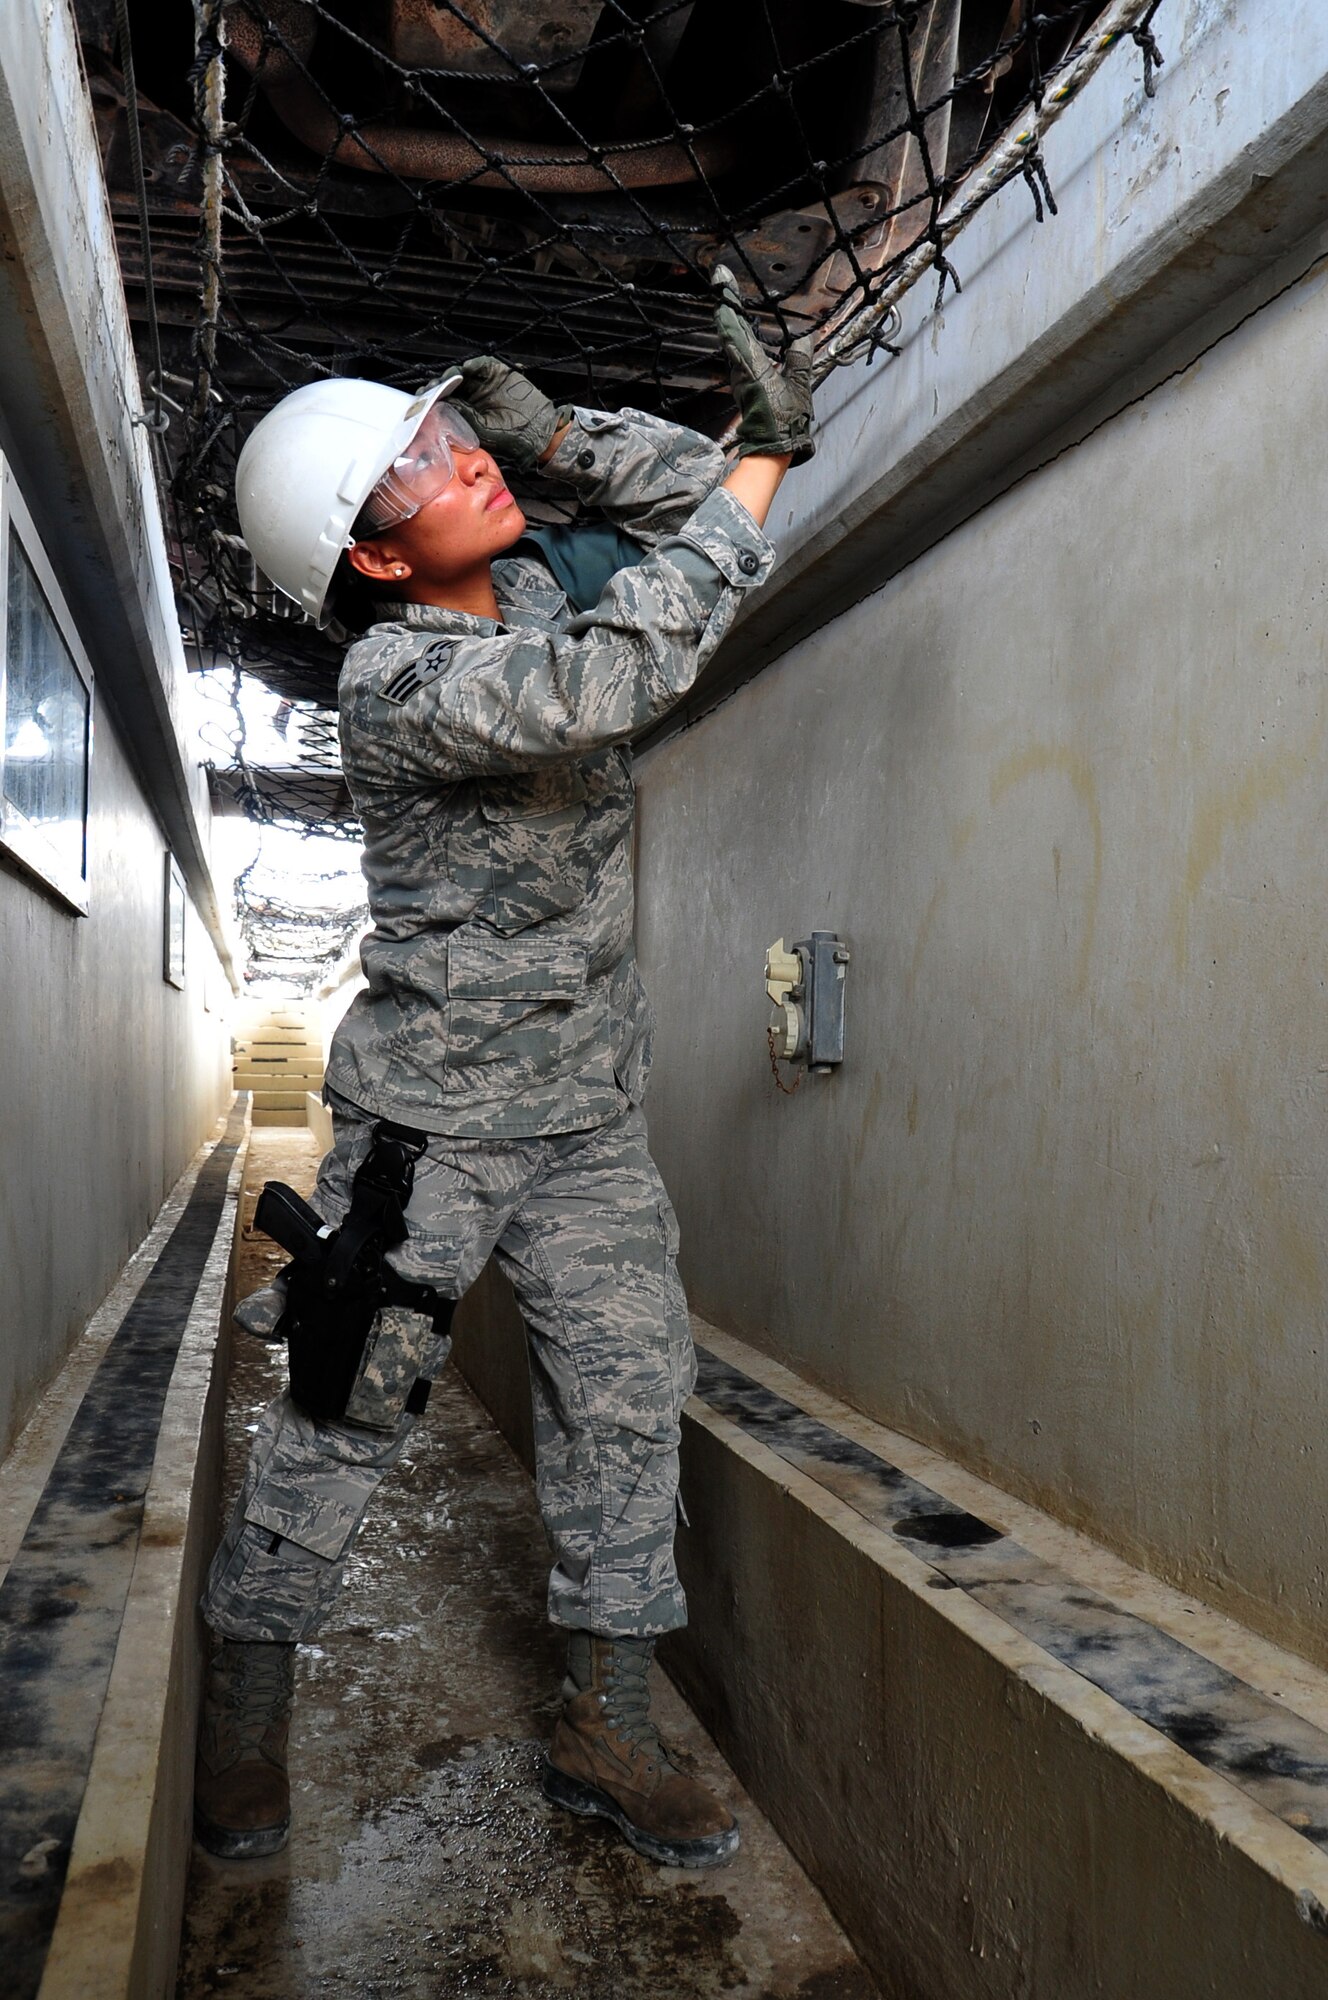 U.S. Air Force Senior Airman Arlene Berker, 380th Expeditionary Security Forces Squadron vehicle search area member checks the undercarriage of a vehicle during an inspection April 30, 2013. 380 ESFS "defenders" provide 24/7 security for base assets and personnel. Berker is deployed from Nellis Air Force Base, Nev., and is a native of Mundelien, Ill. (U.S. Air Force photo by Staff Sgt. Timothy Boyer)